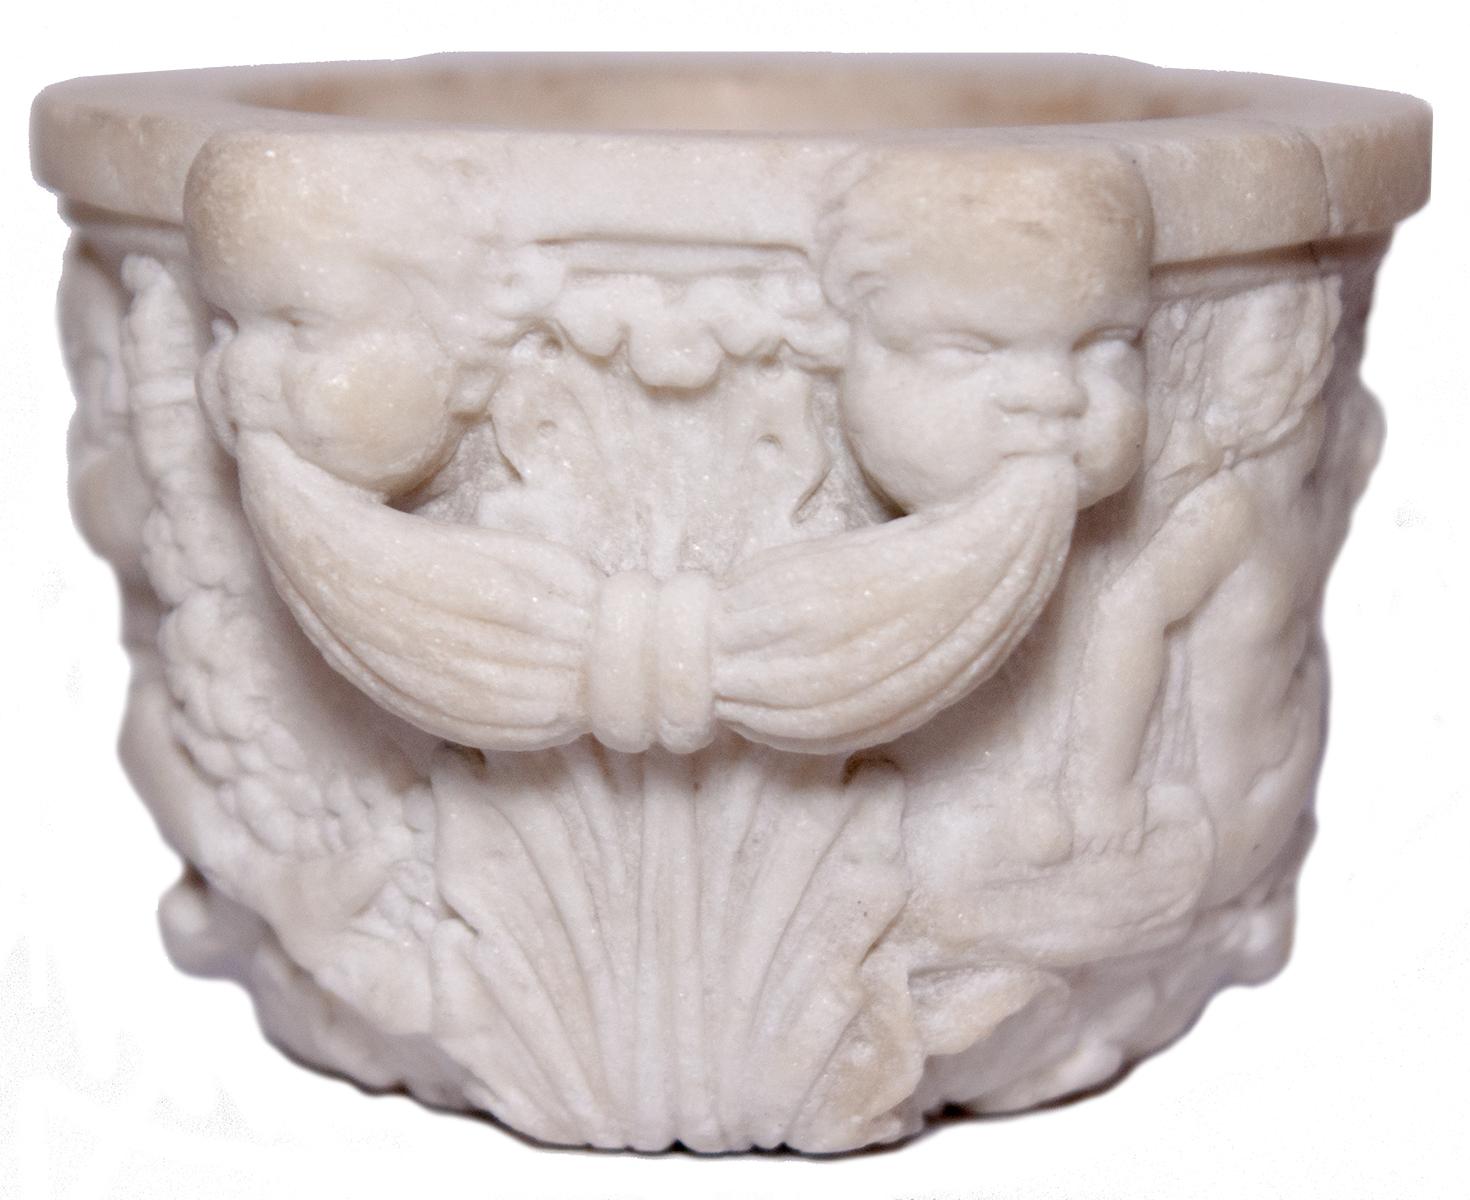 Small mortar or marble measure adorned with acanthus leaves and scenes of putti and fauns playing and drinking. The handles consist of putti masks disguising foliage.

Diameter: 9.5 to 10.5 - Height: 7 cm

Italy or Germany, end 18 th - early 19 th